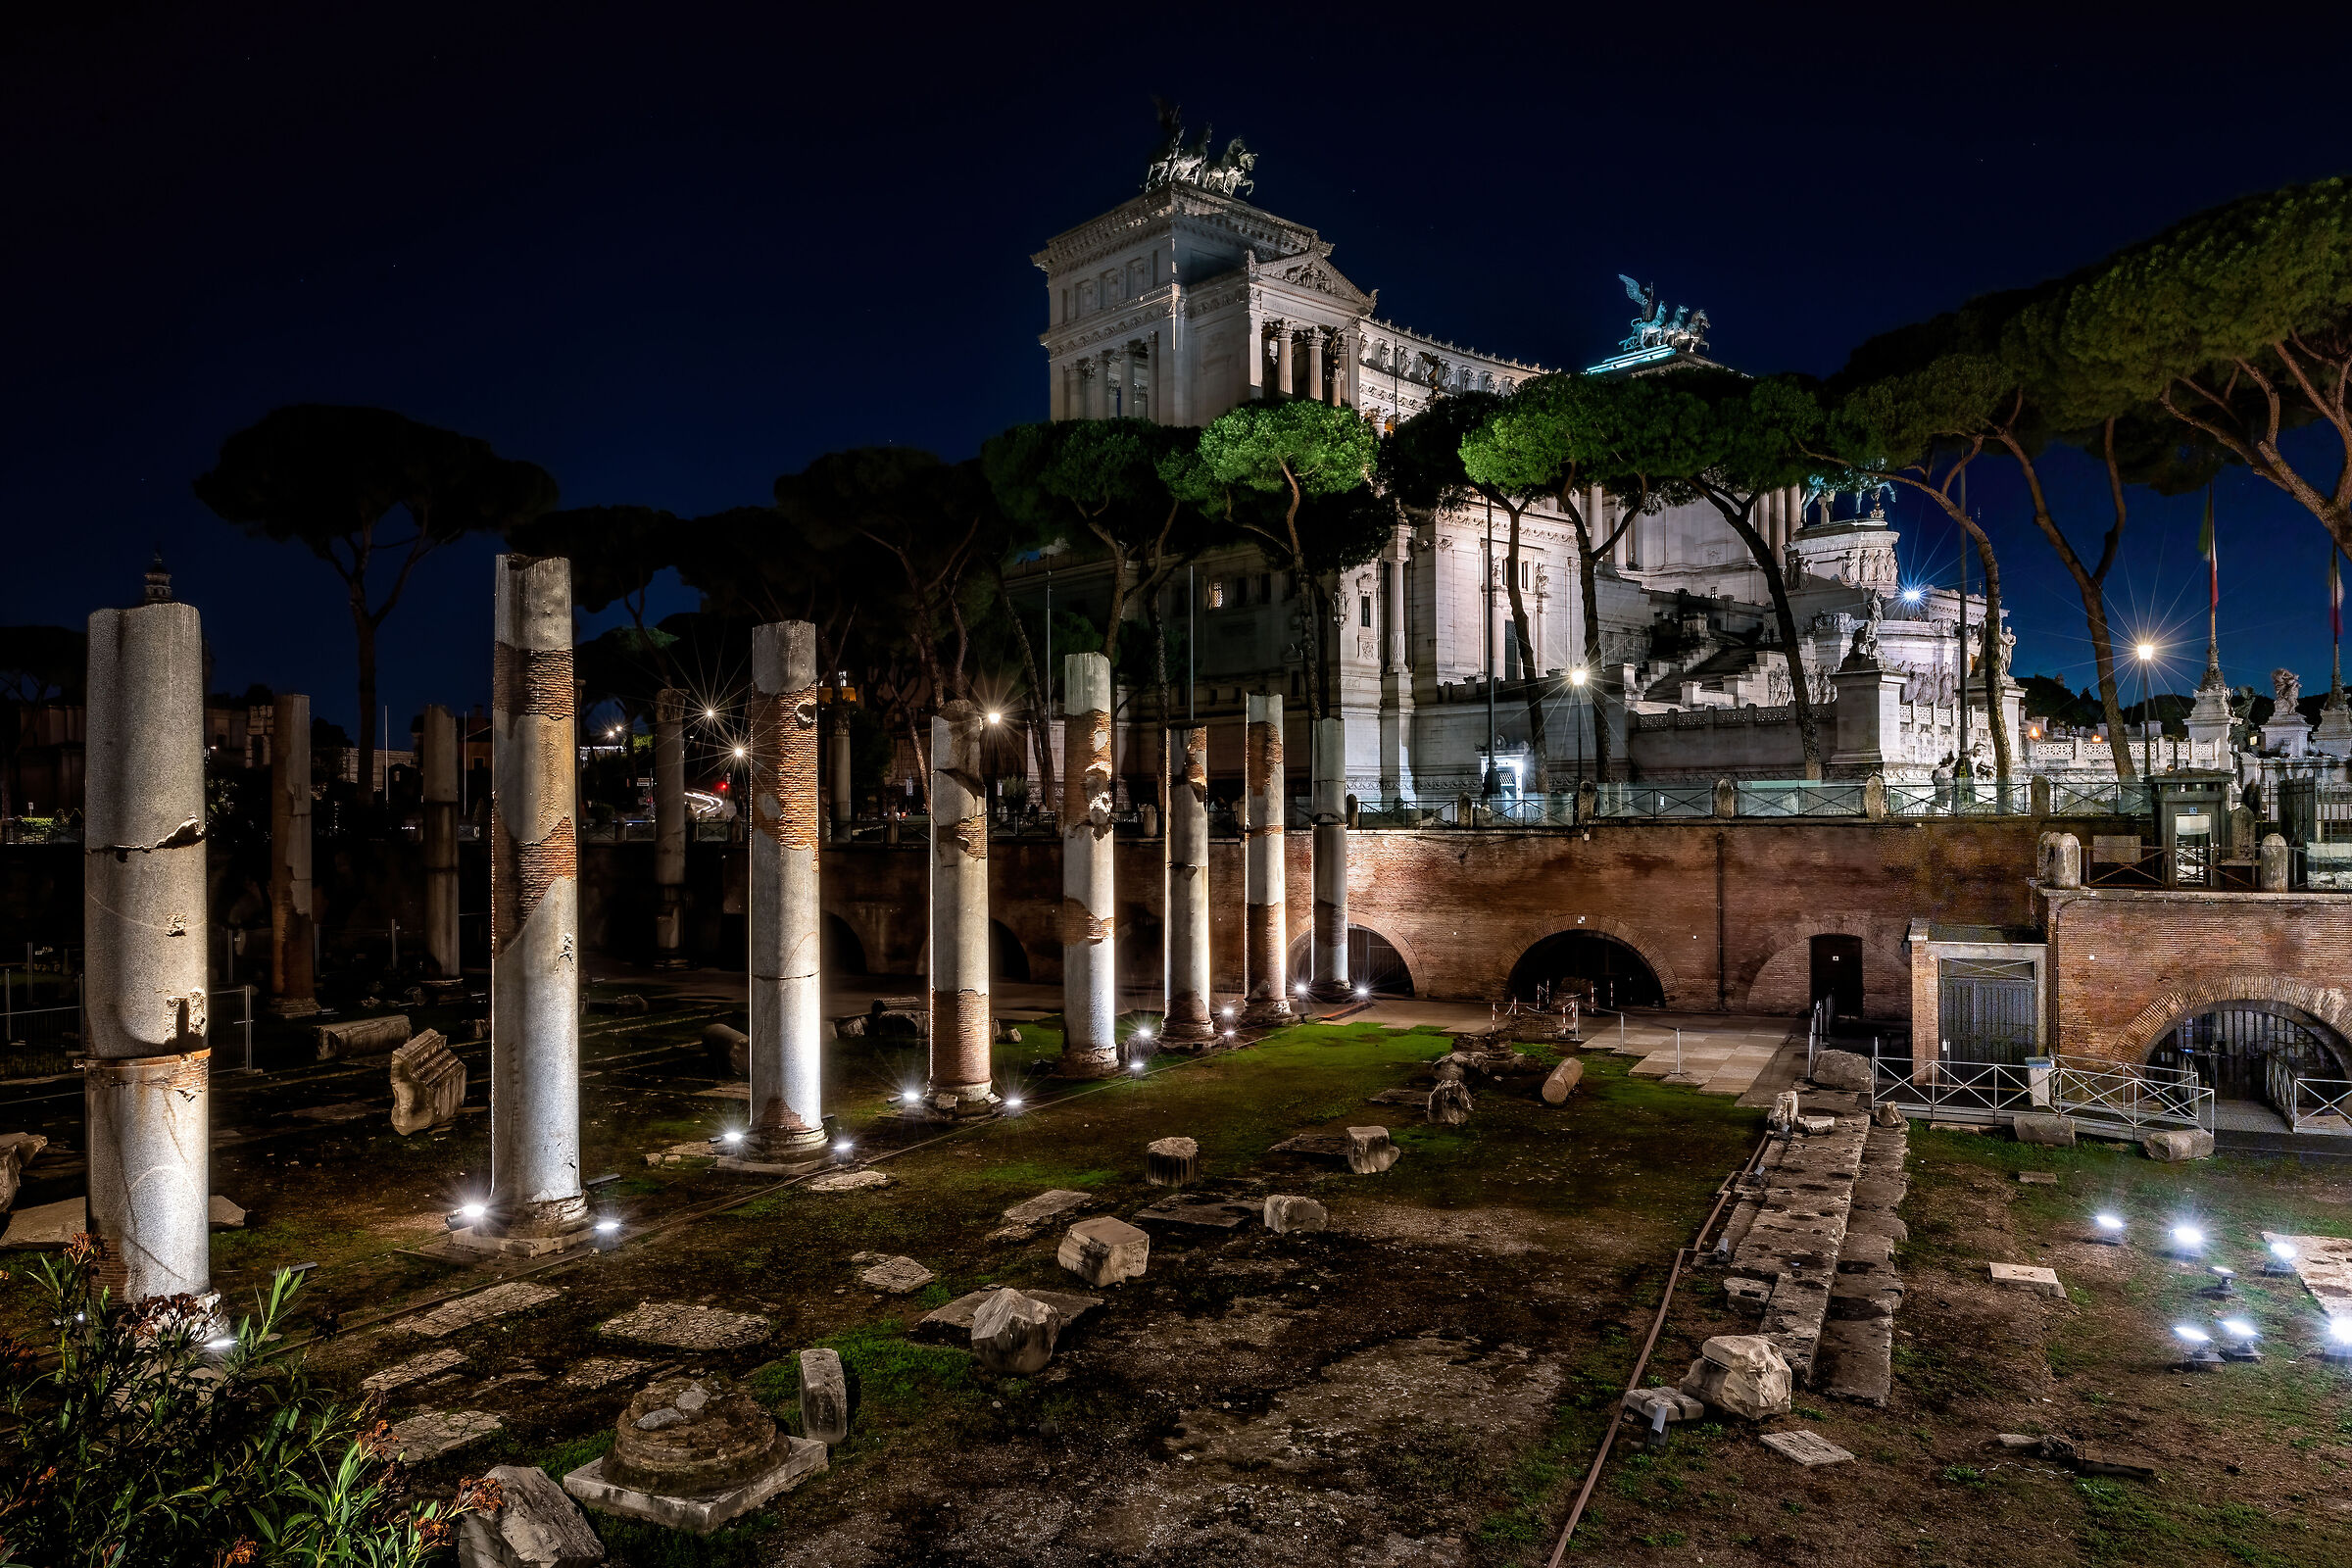 The Vittoriano and the Trajan Forum...